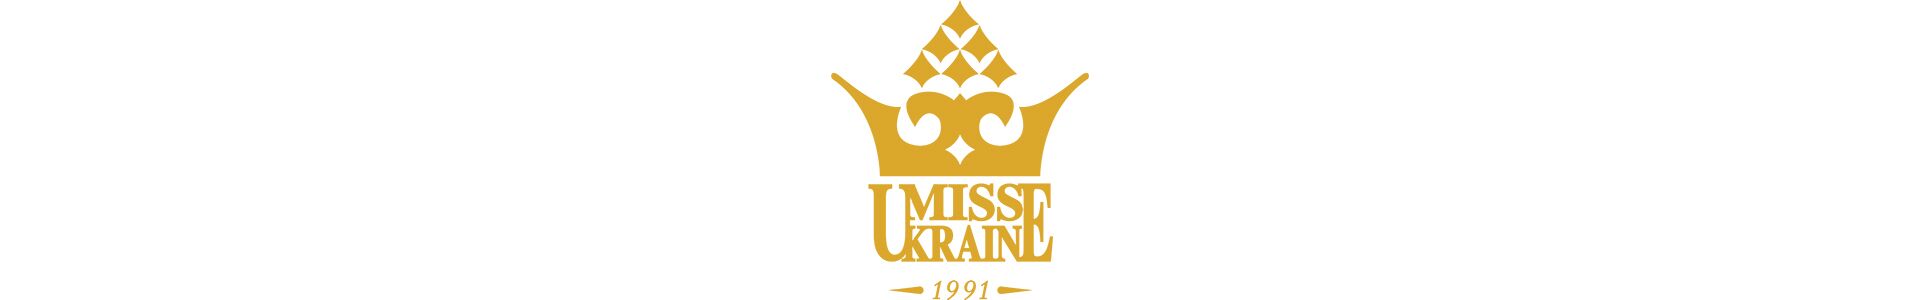 Miss Ukraine in the project "Beauty for the Good" by Vladimir Kozyuk and a charity auction in M17